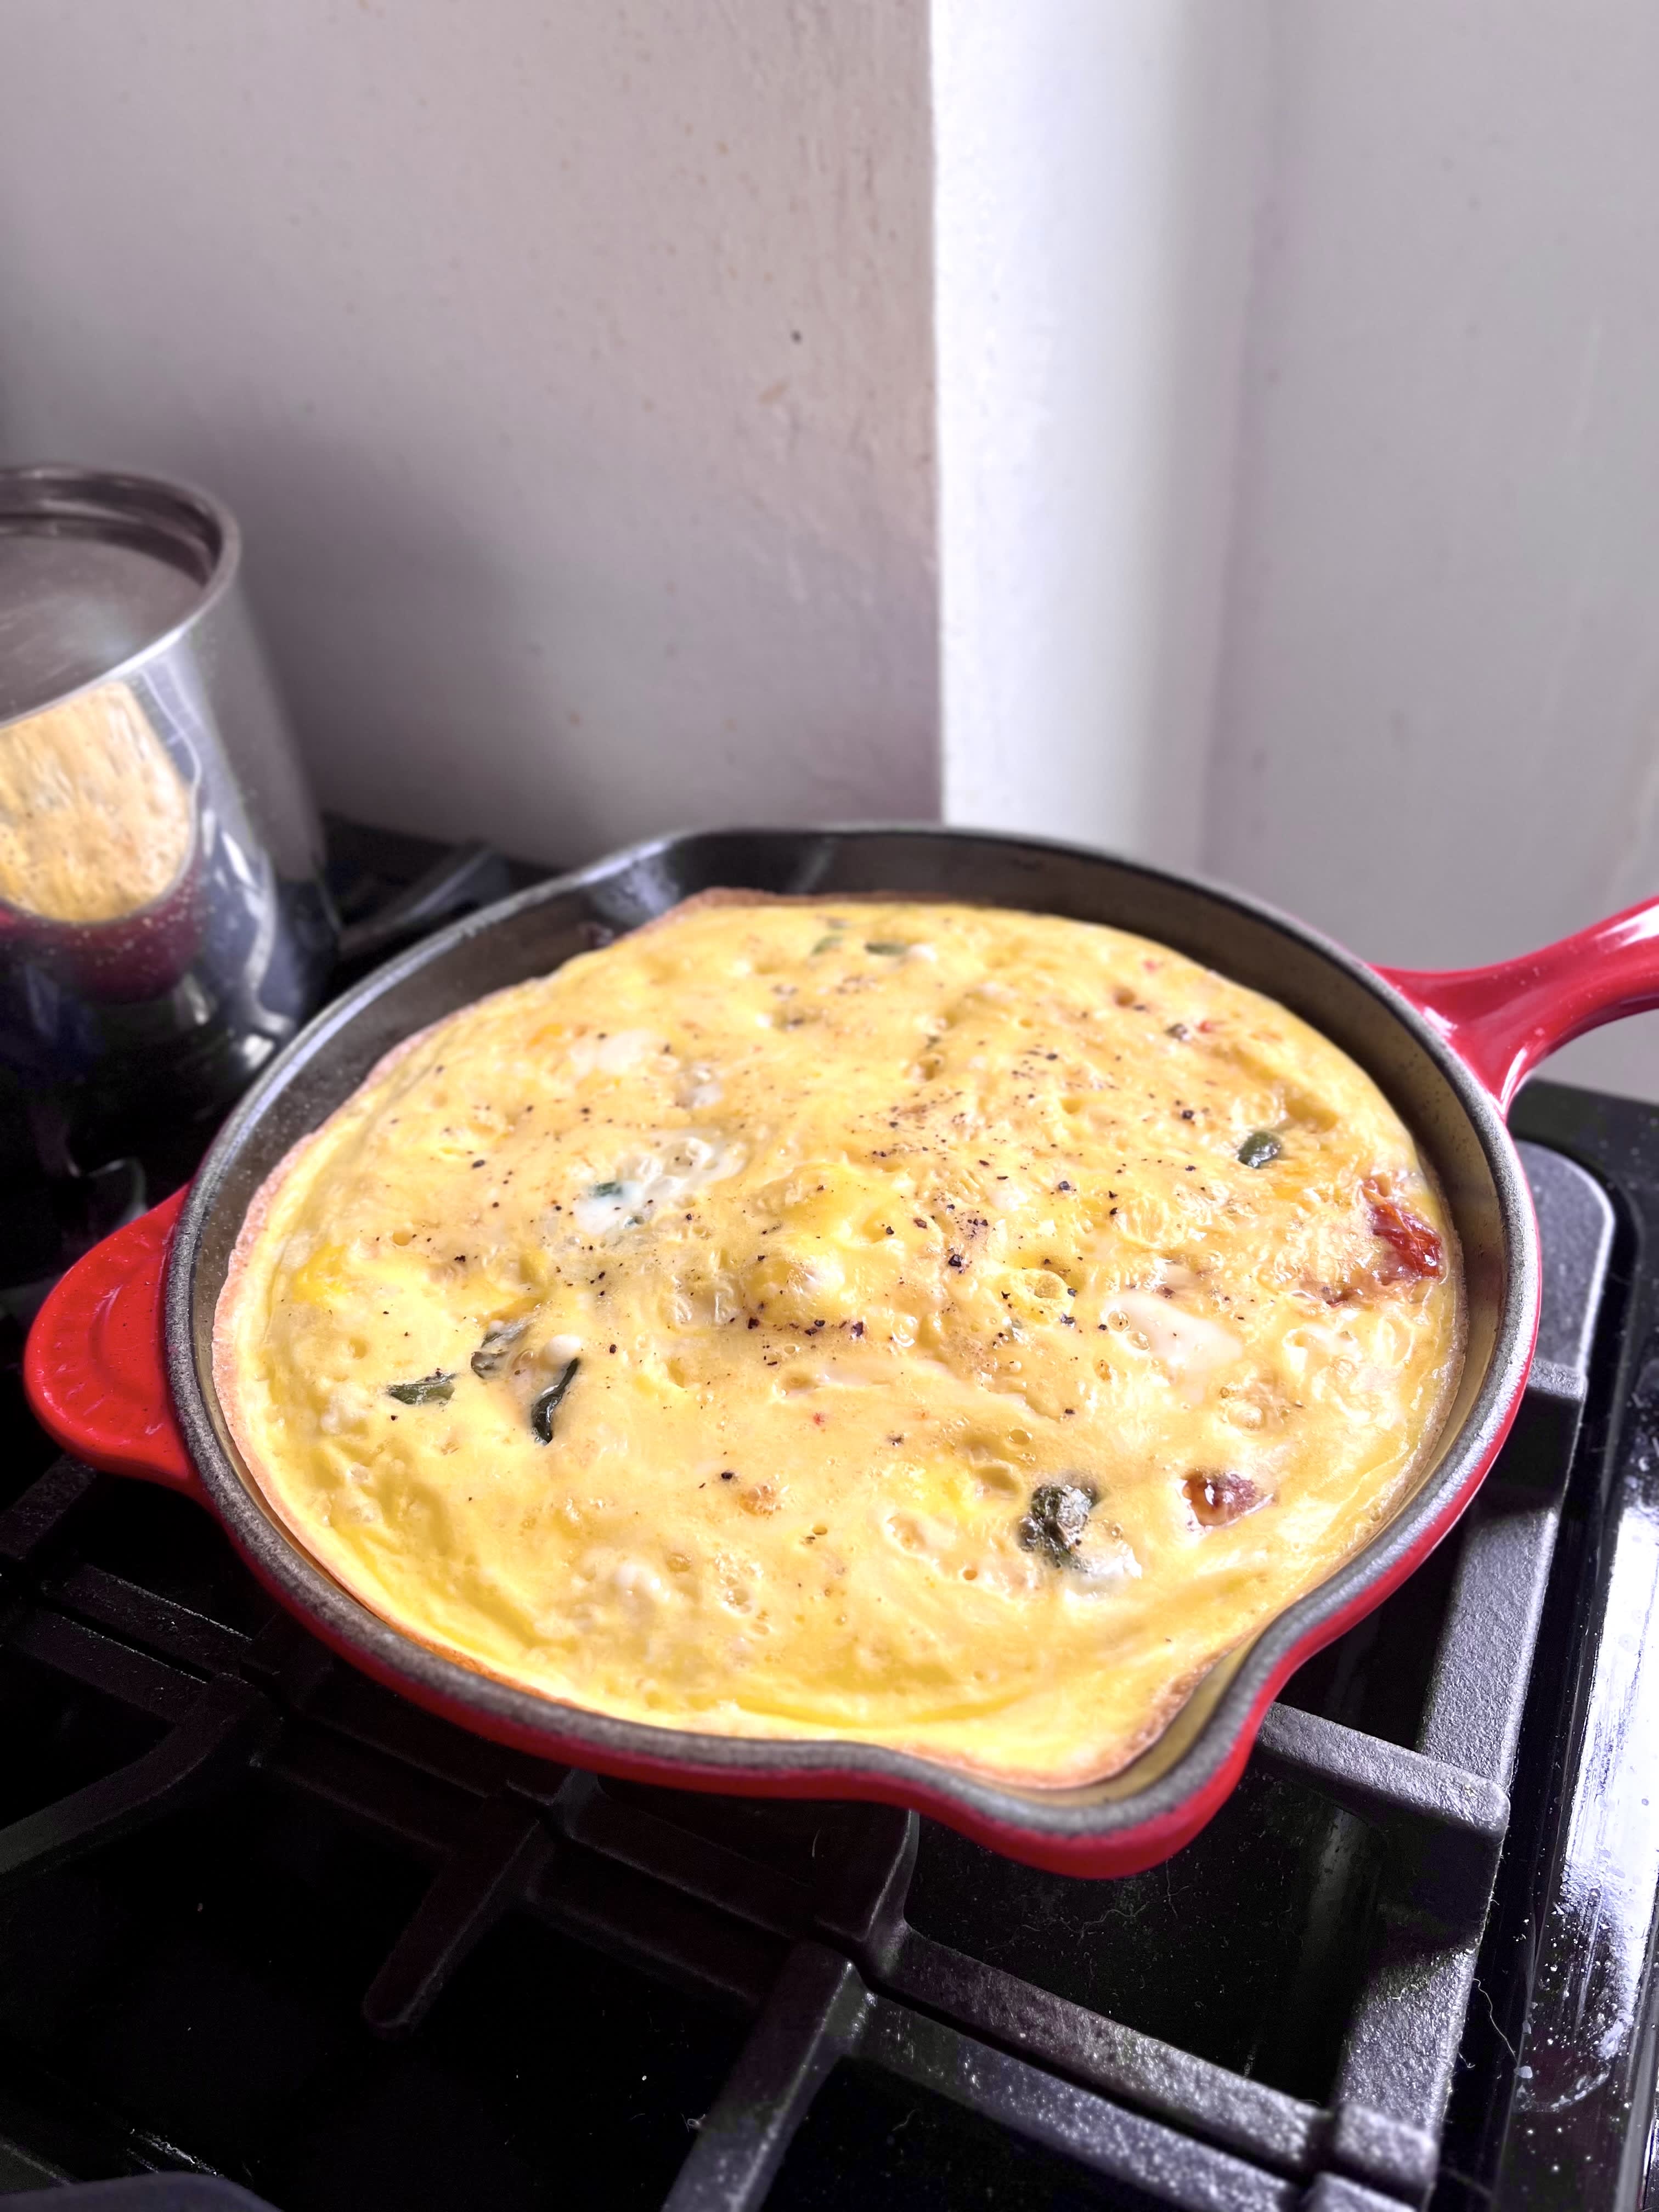 Why I Love the Le Creuset Signature Skillet: Tried & Tested